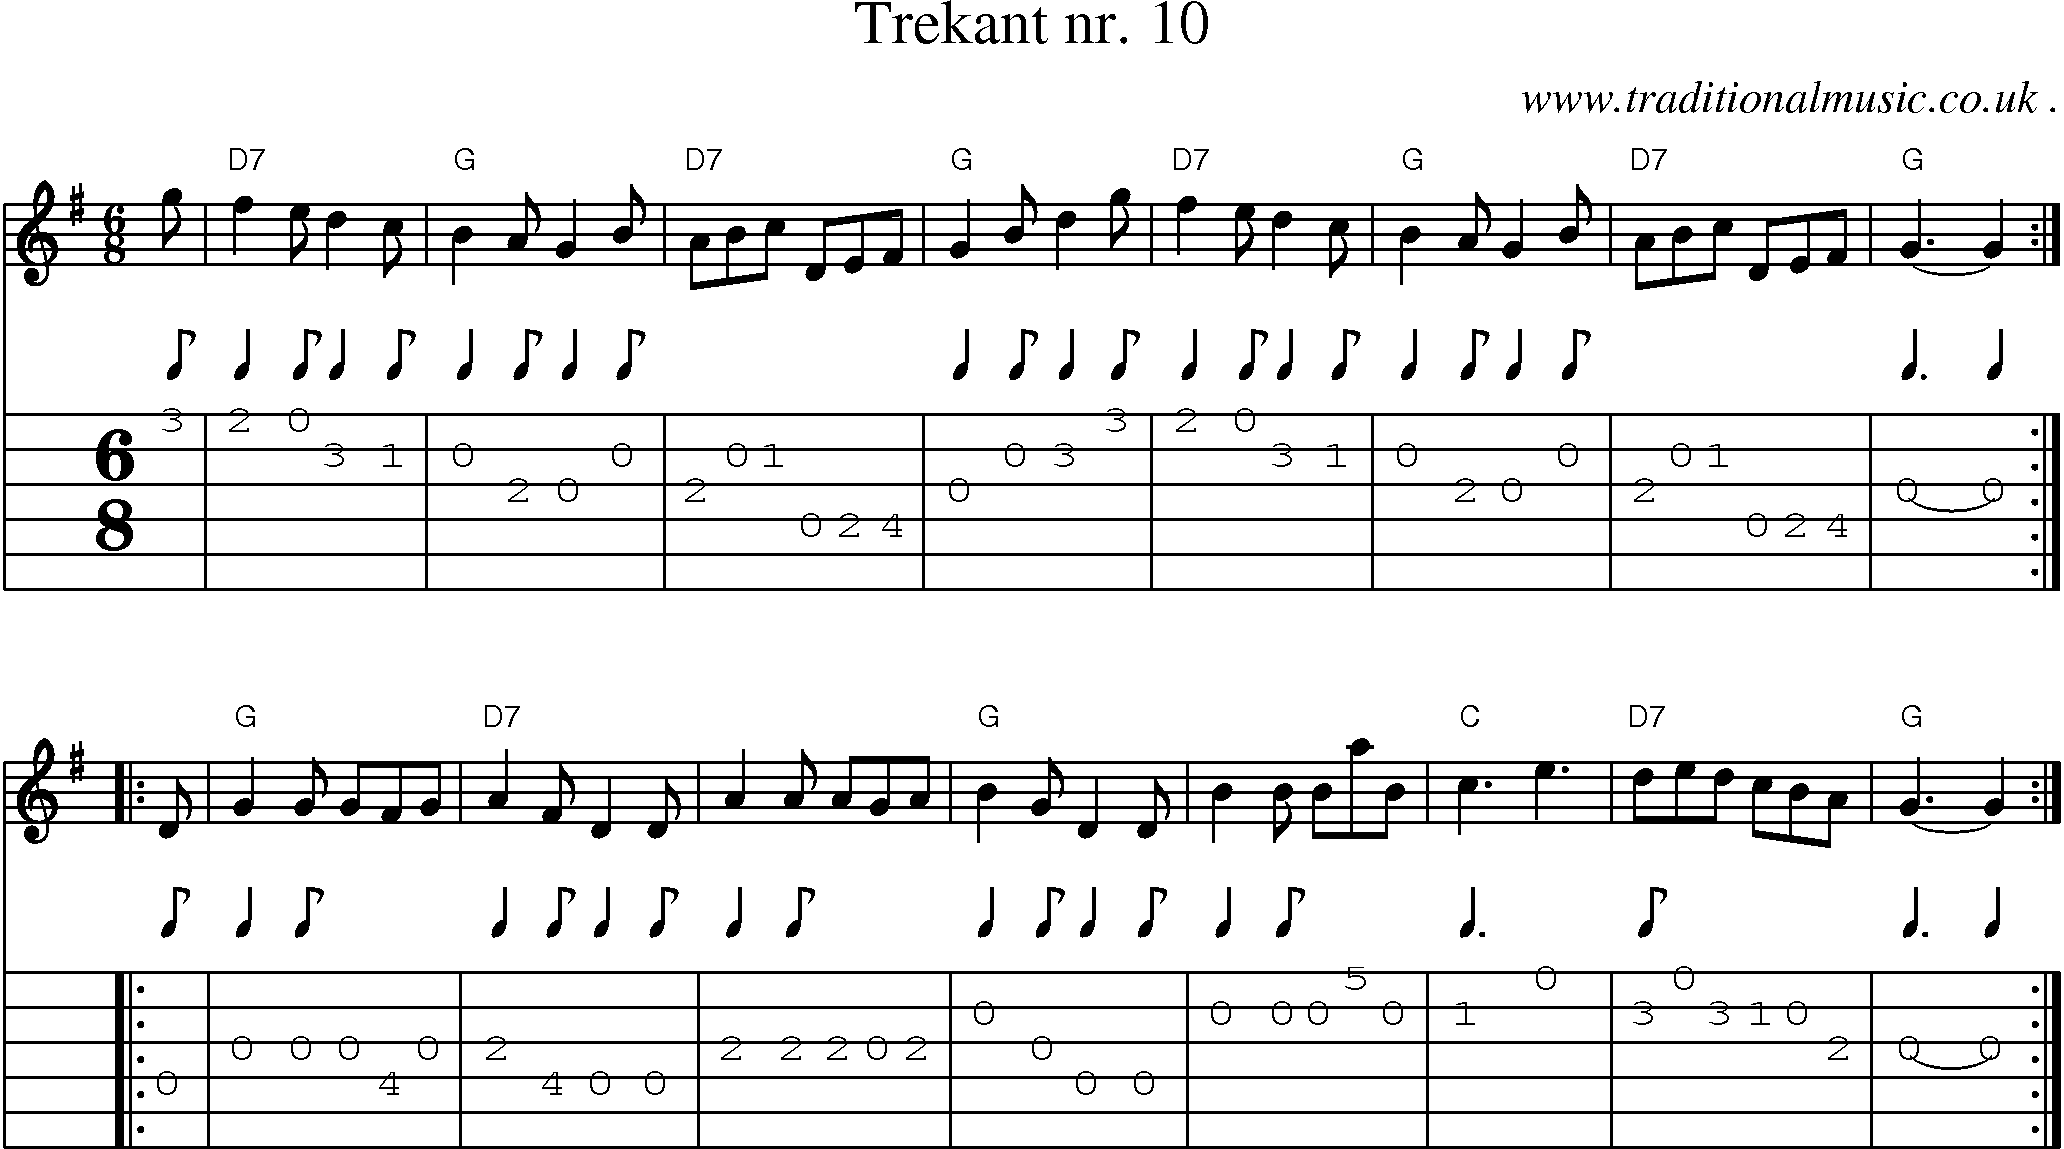 Sheet-music  score, Chords and Guitar Tabs for Trekant Nr 10